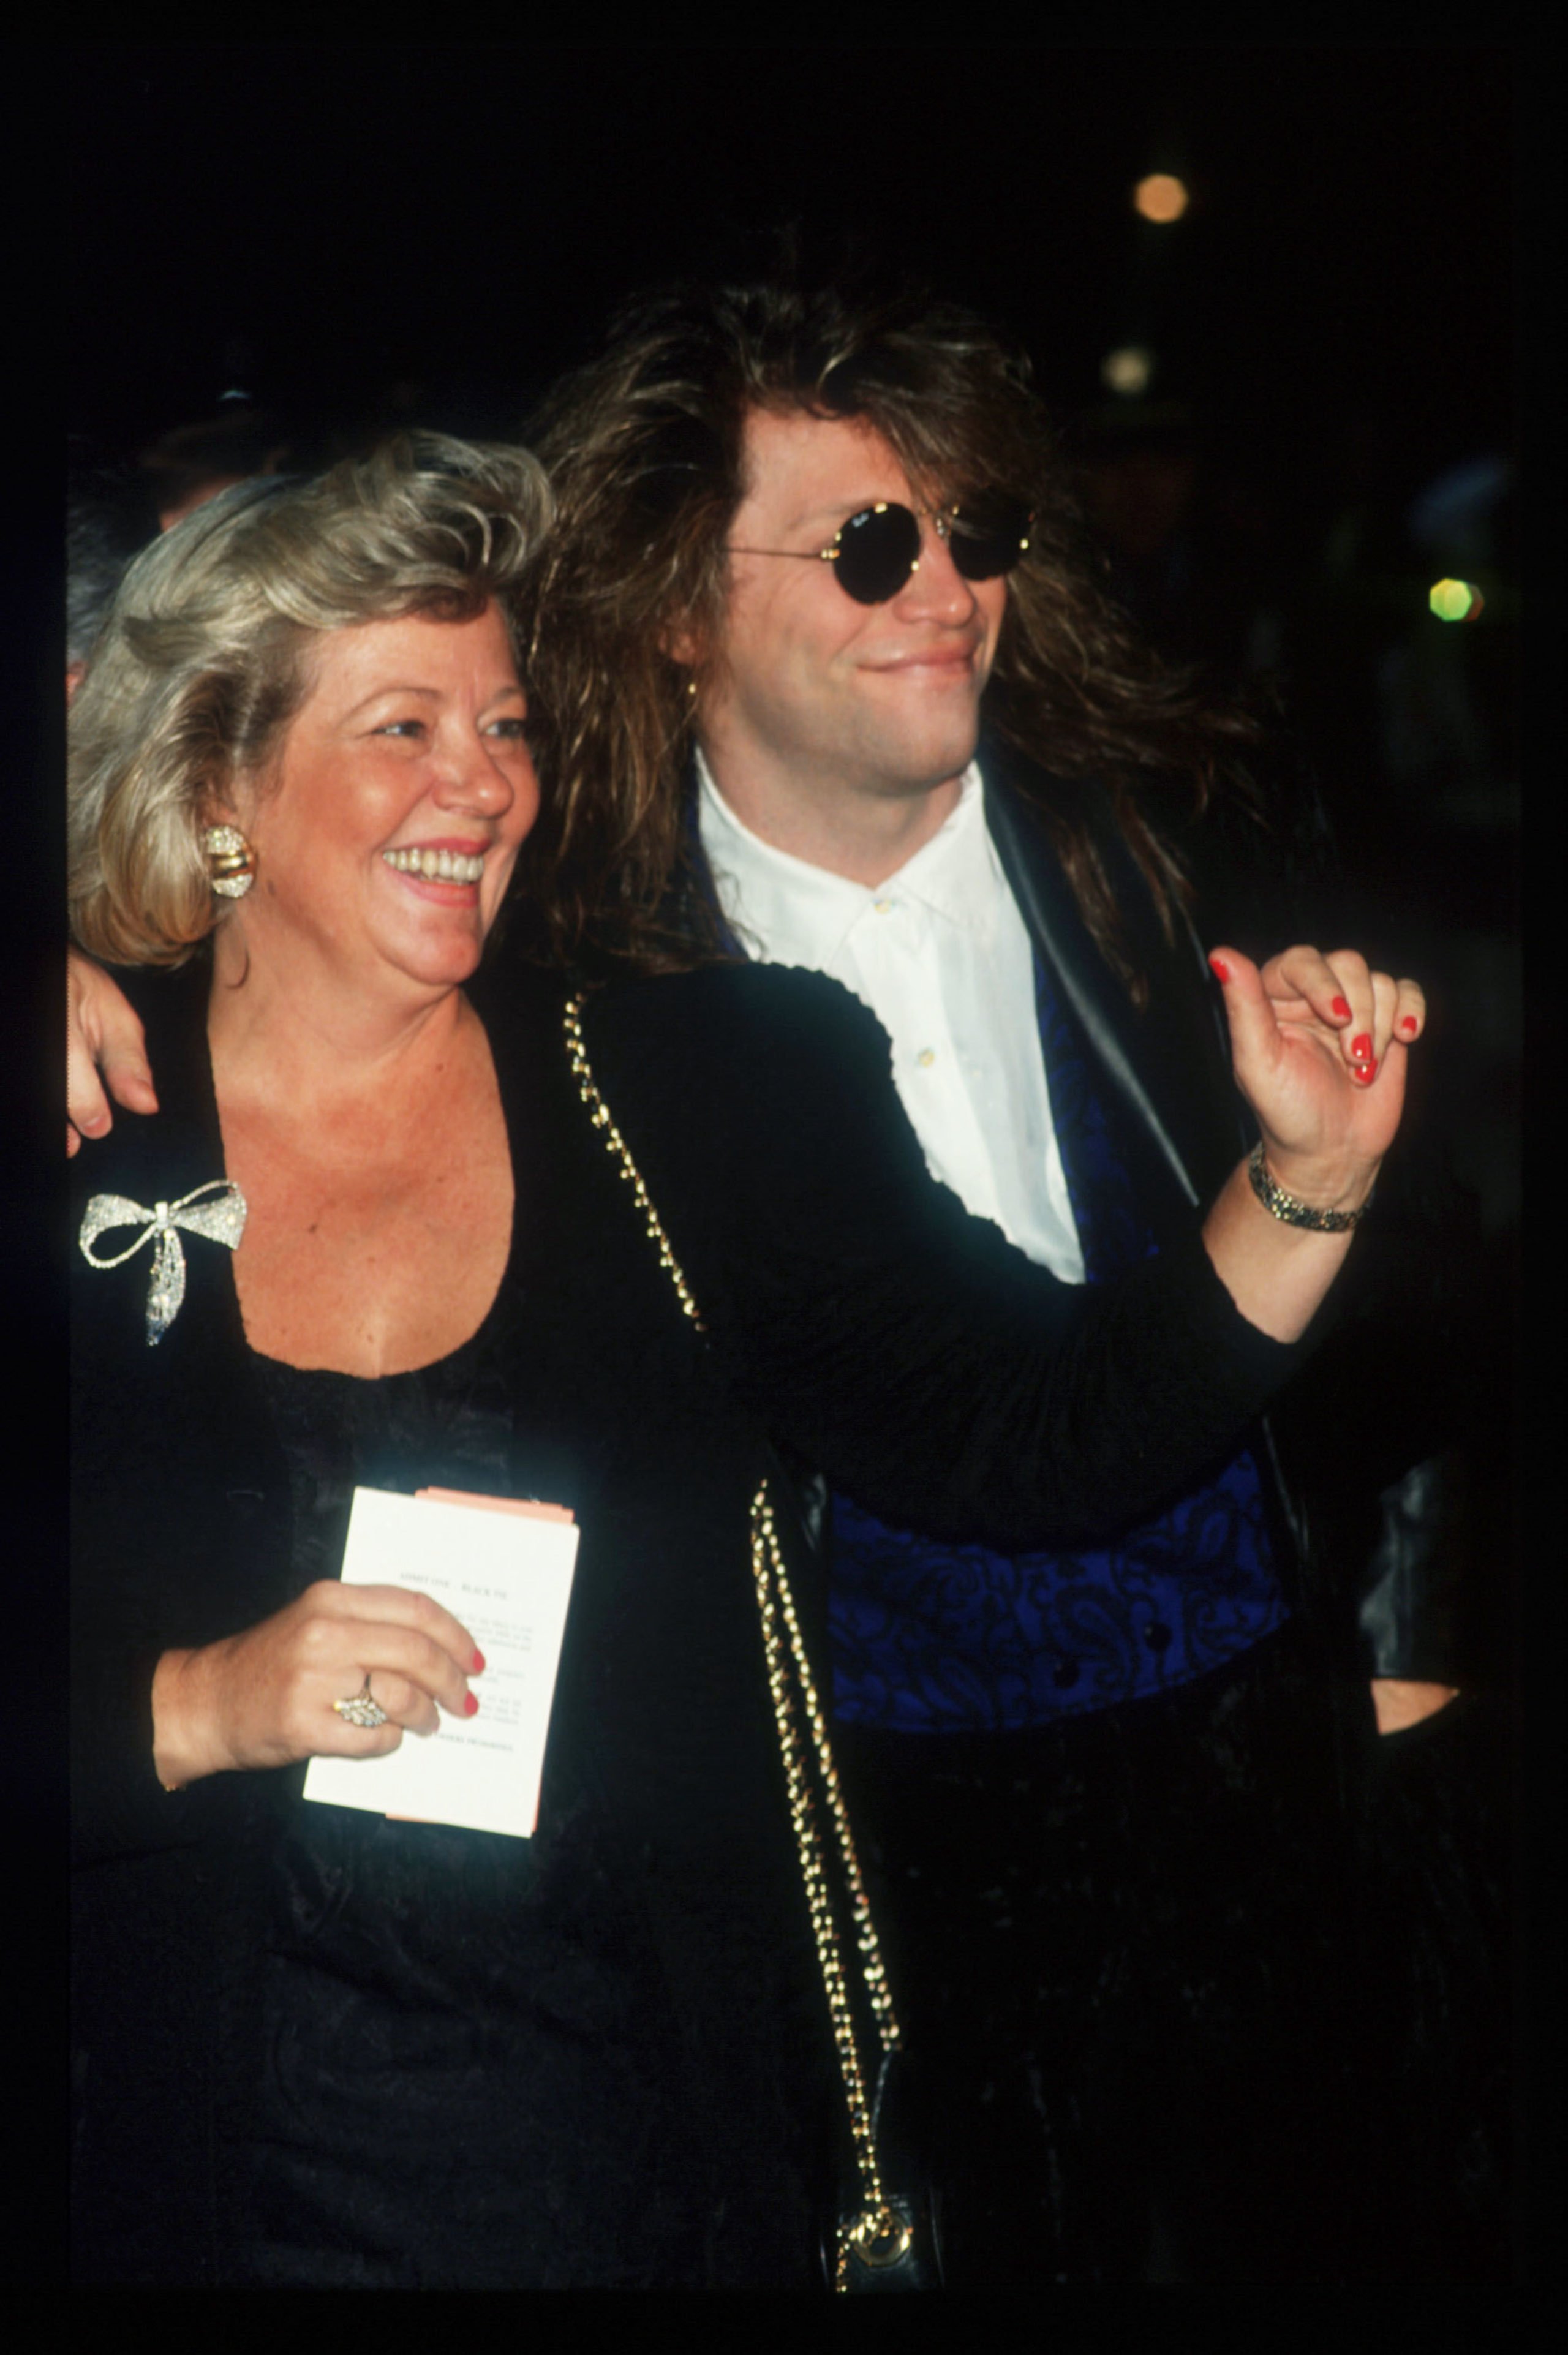 089910 32: Jon Bon Jovi and his mother attend the Grammy Awards February 20, 1991 in New York City. The recording industry''s most prestigious award, the Grammy is presented annually and brings together thousands of creative and technical professionals. (Photo by Steve Allen/Liaison) Getty Images